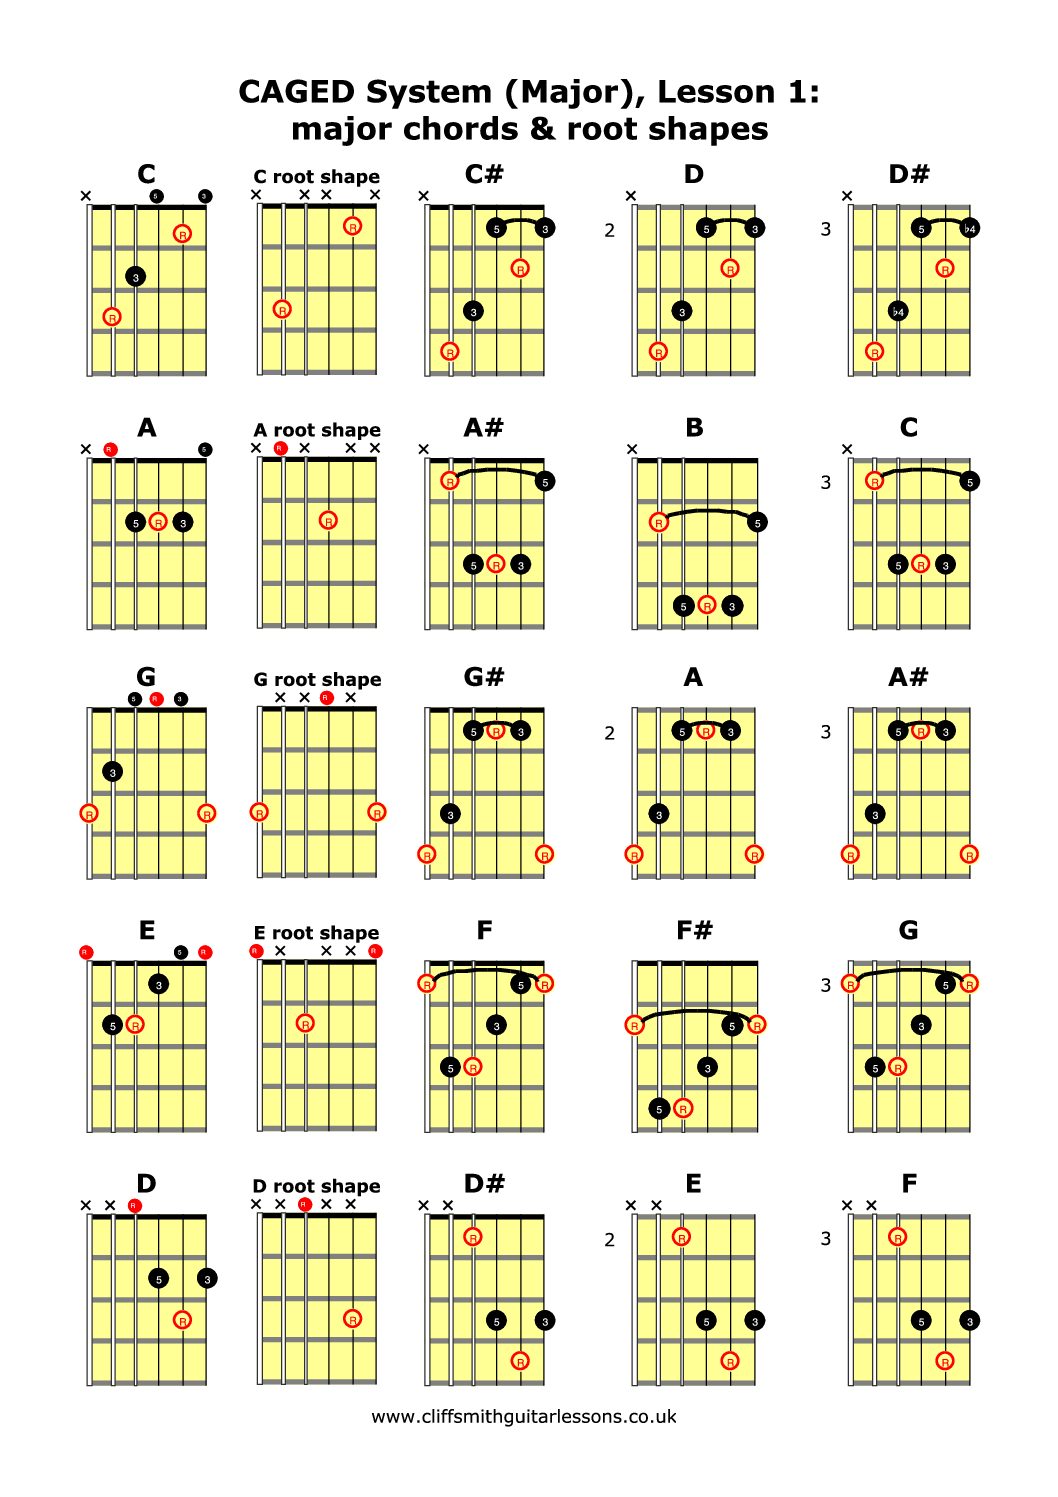 caged-system-major-lesson-1-major-chords-root-shapes-cliff